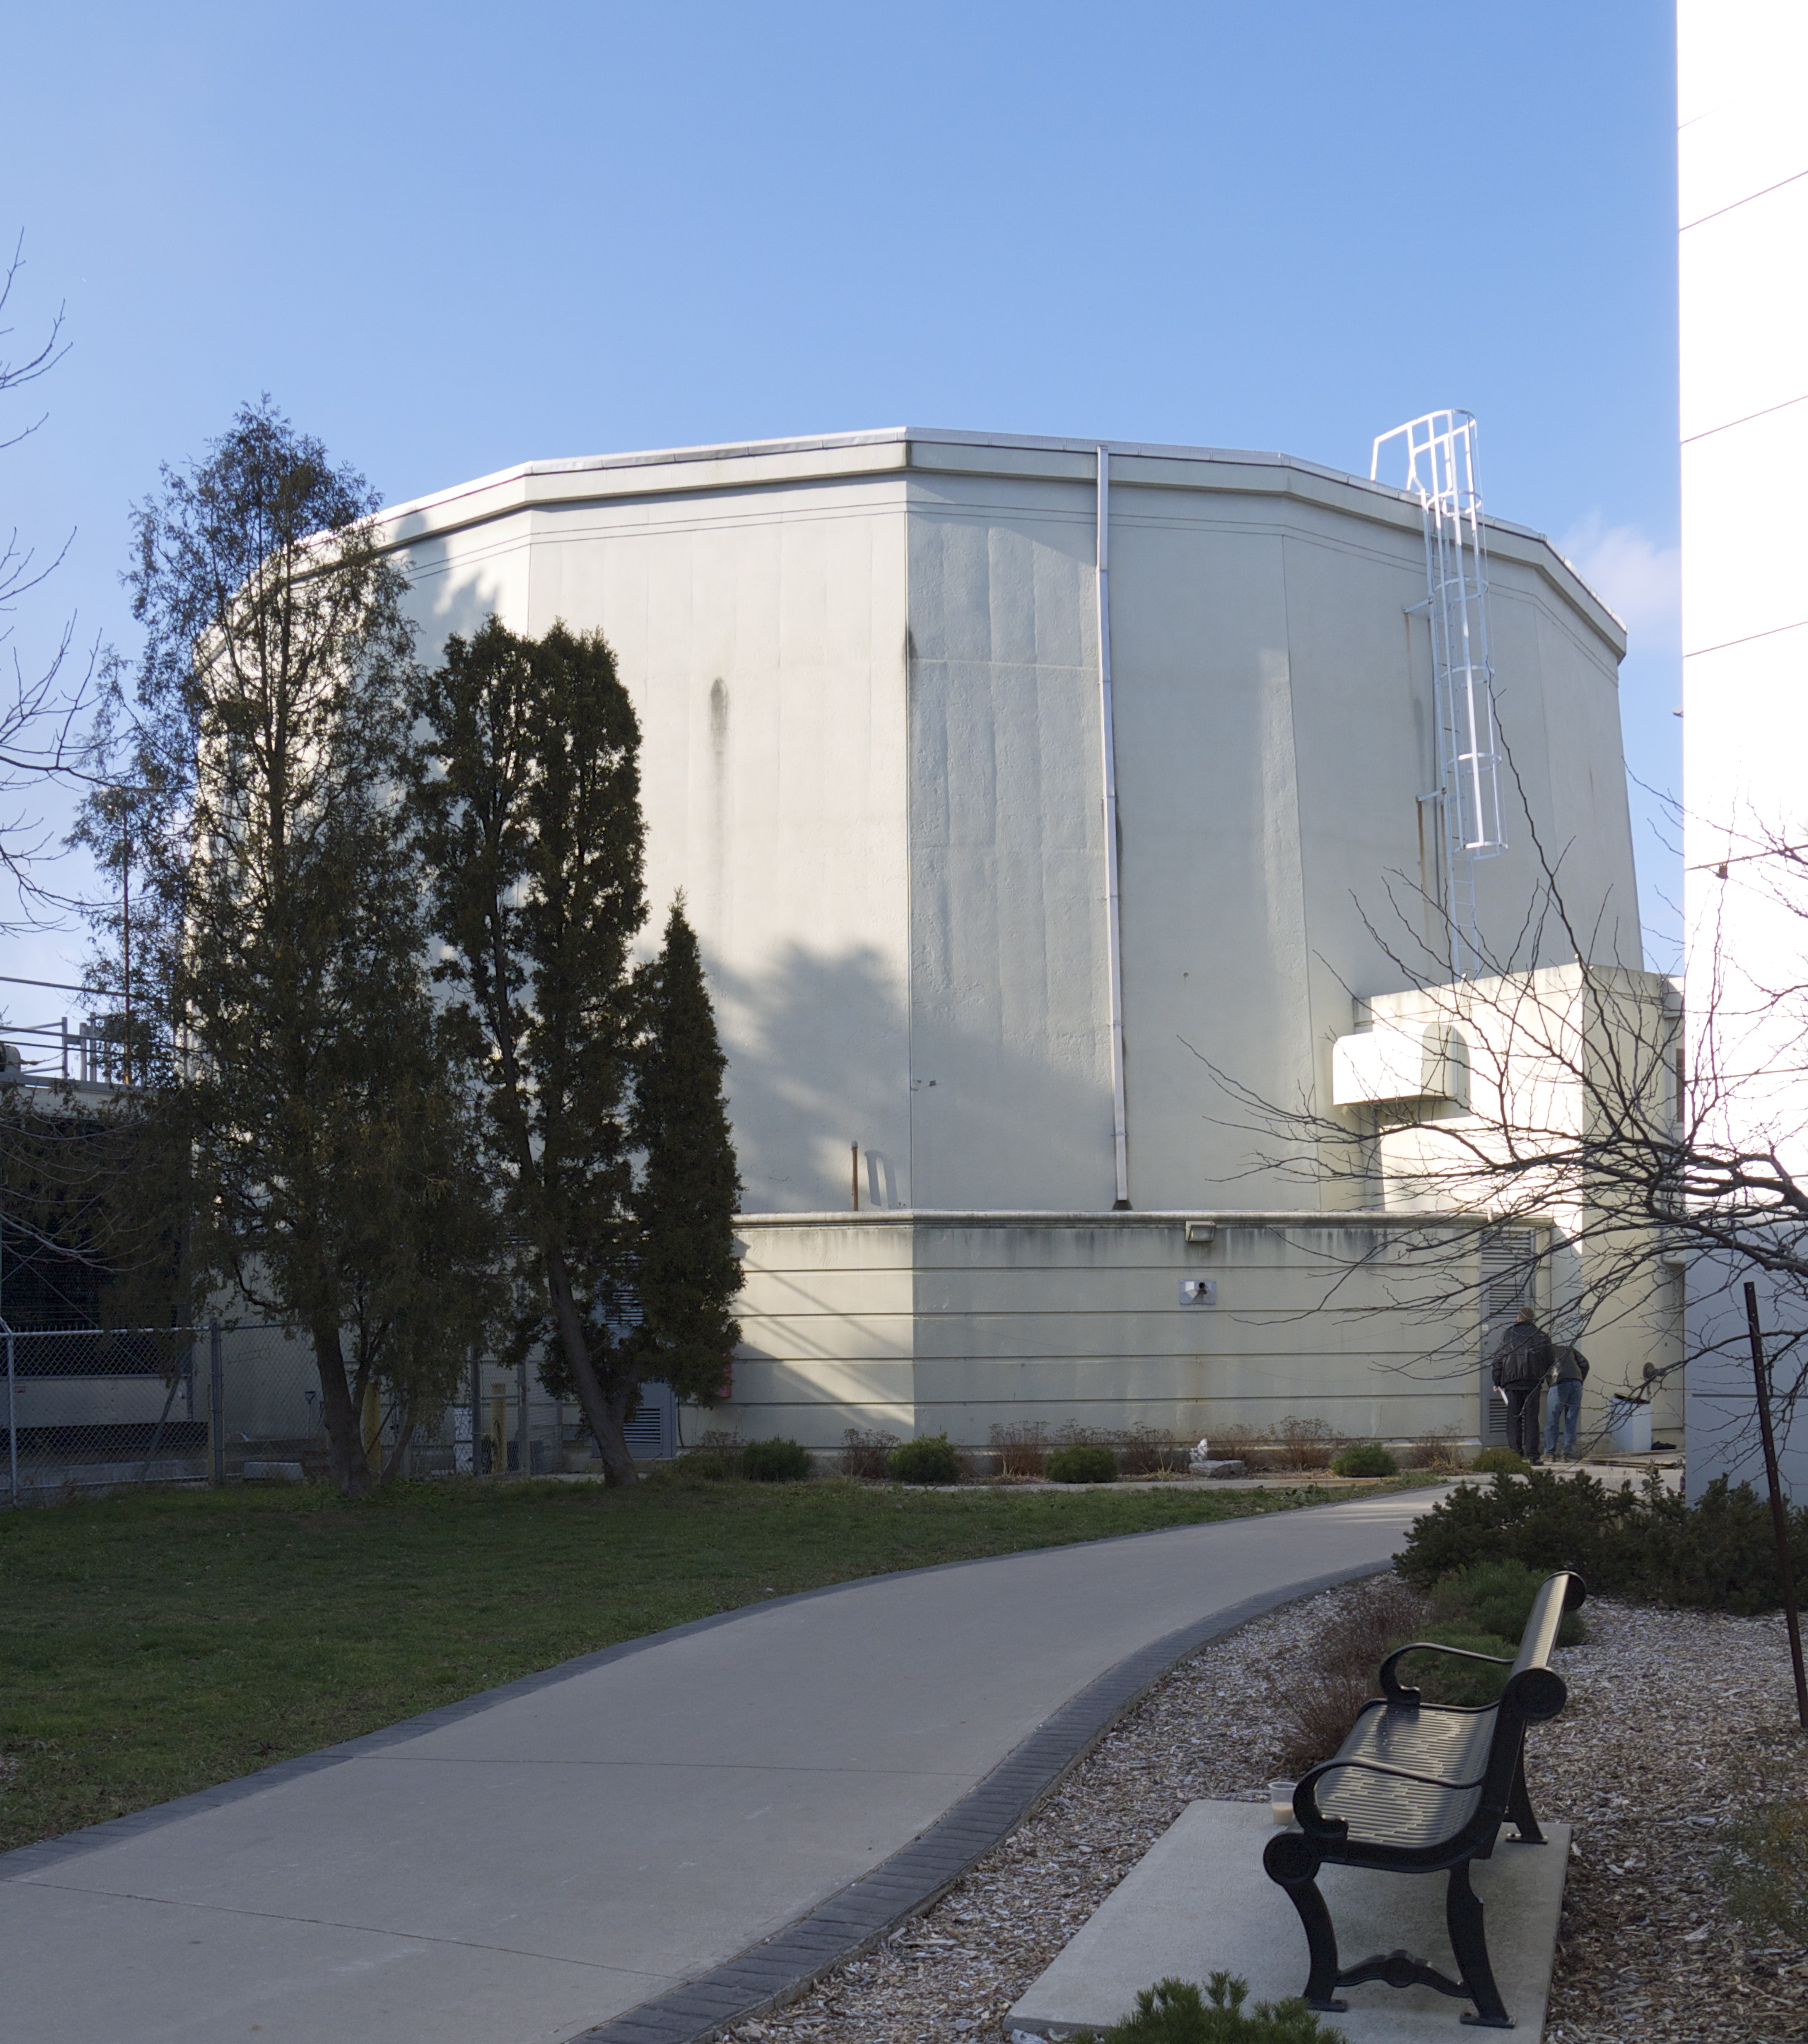 Exterior of McMaster Nuclear Reactor.